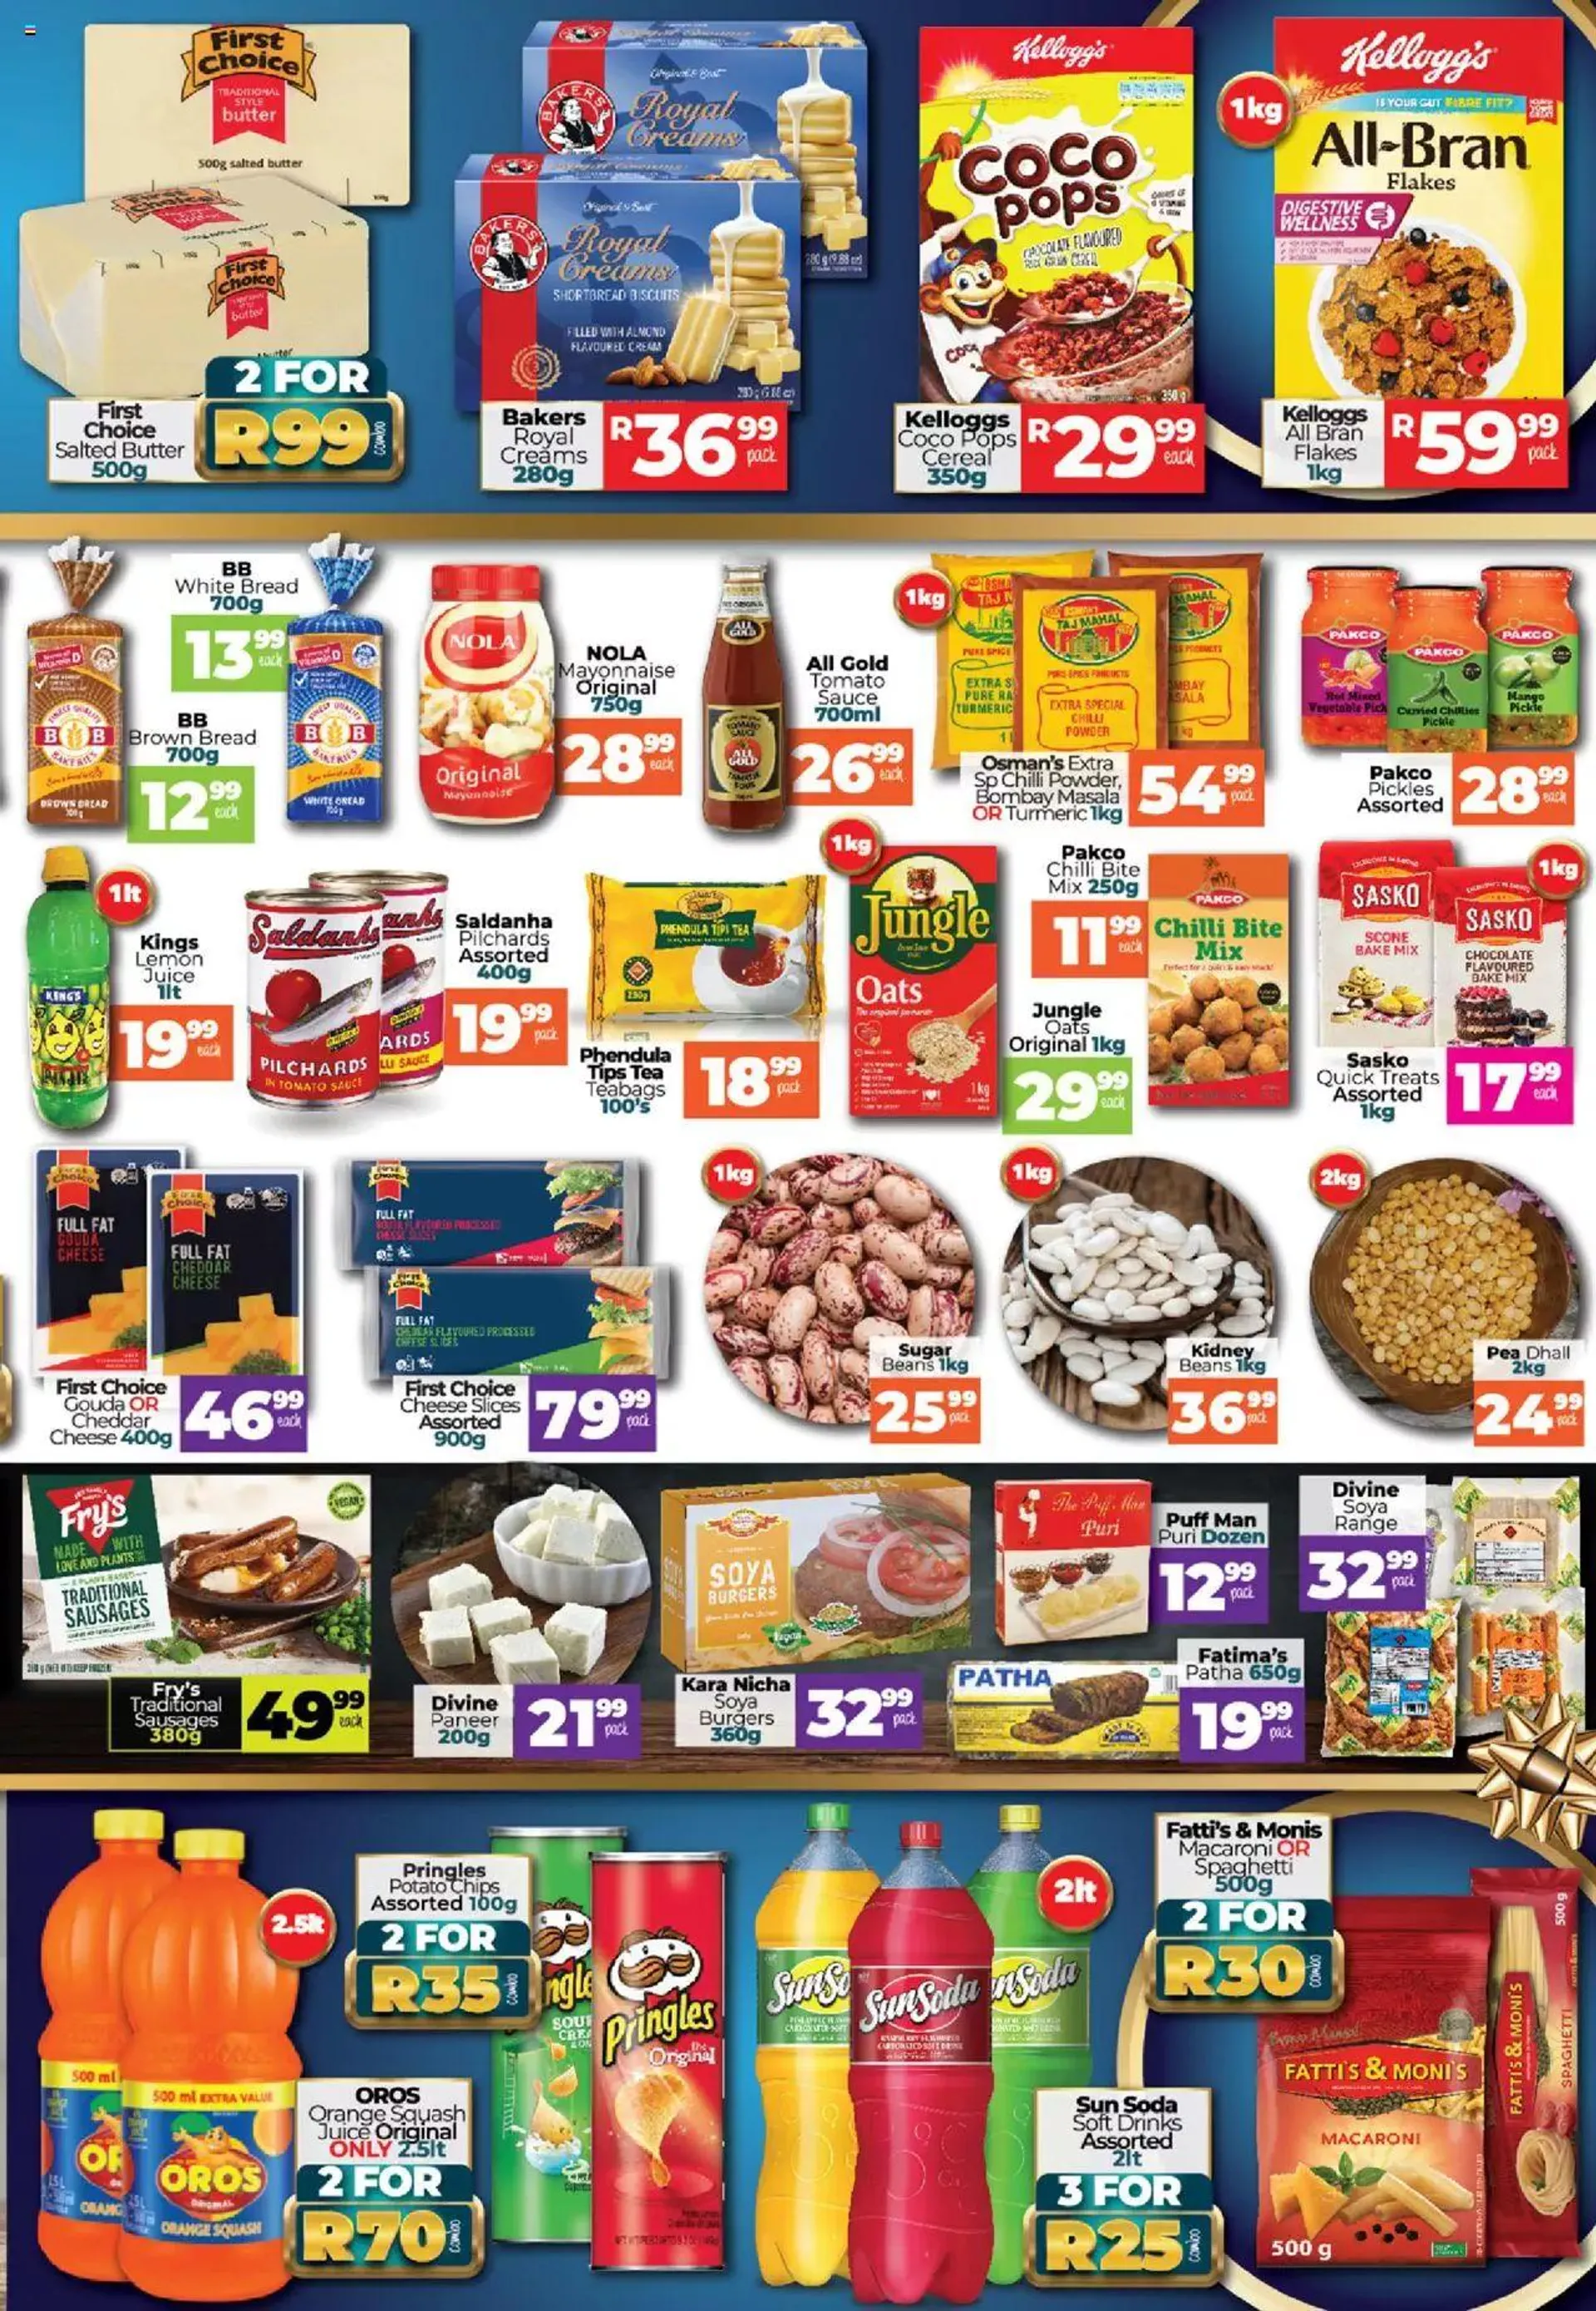 Take n Pay - Specials - 3